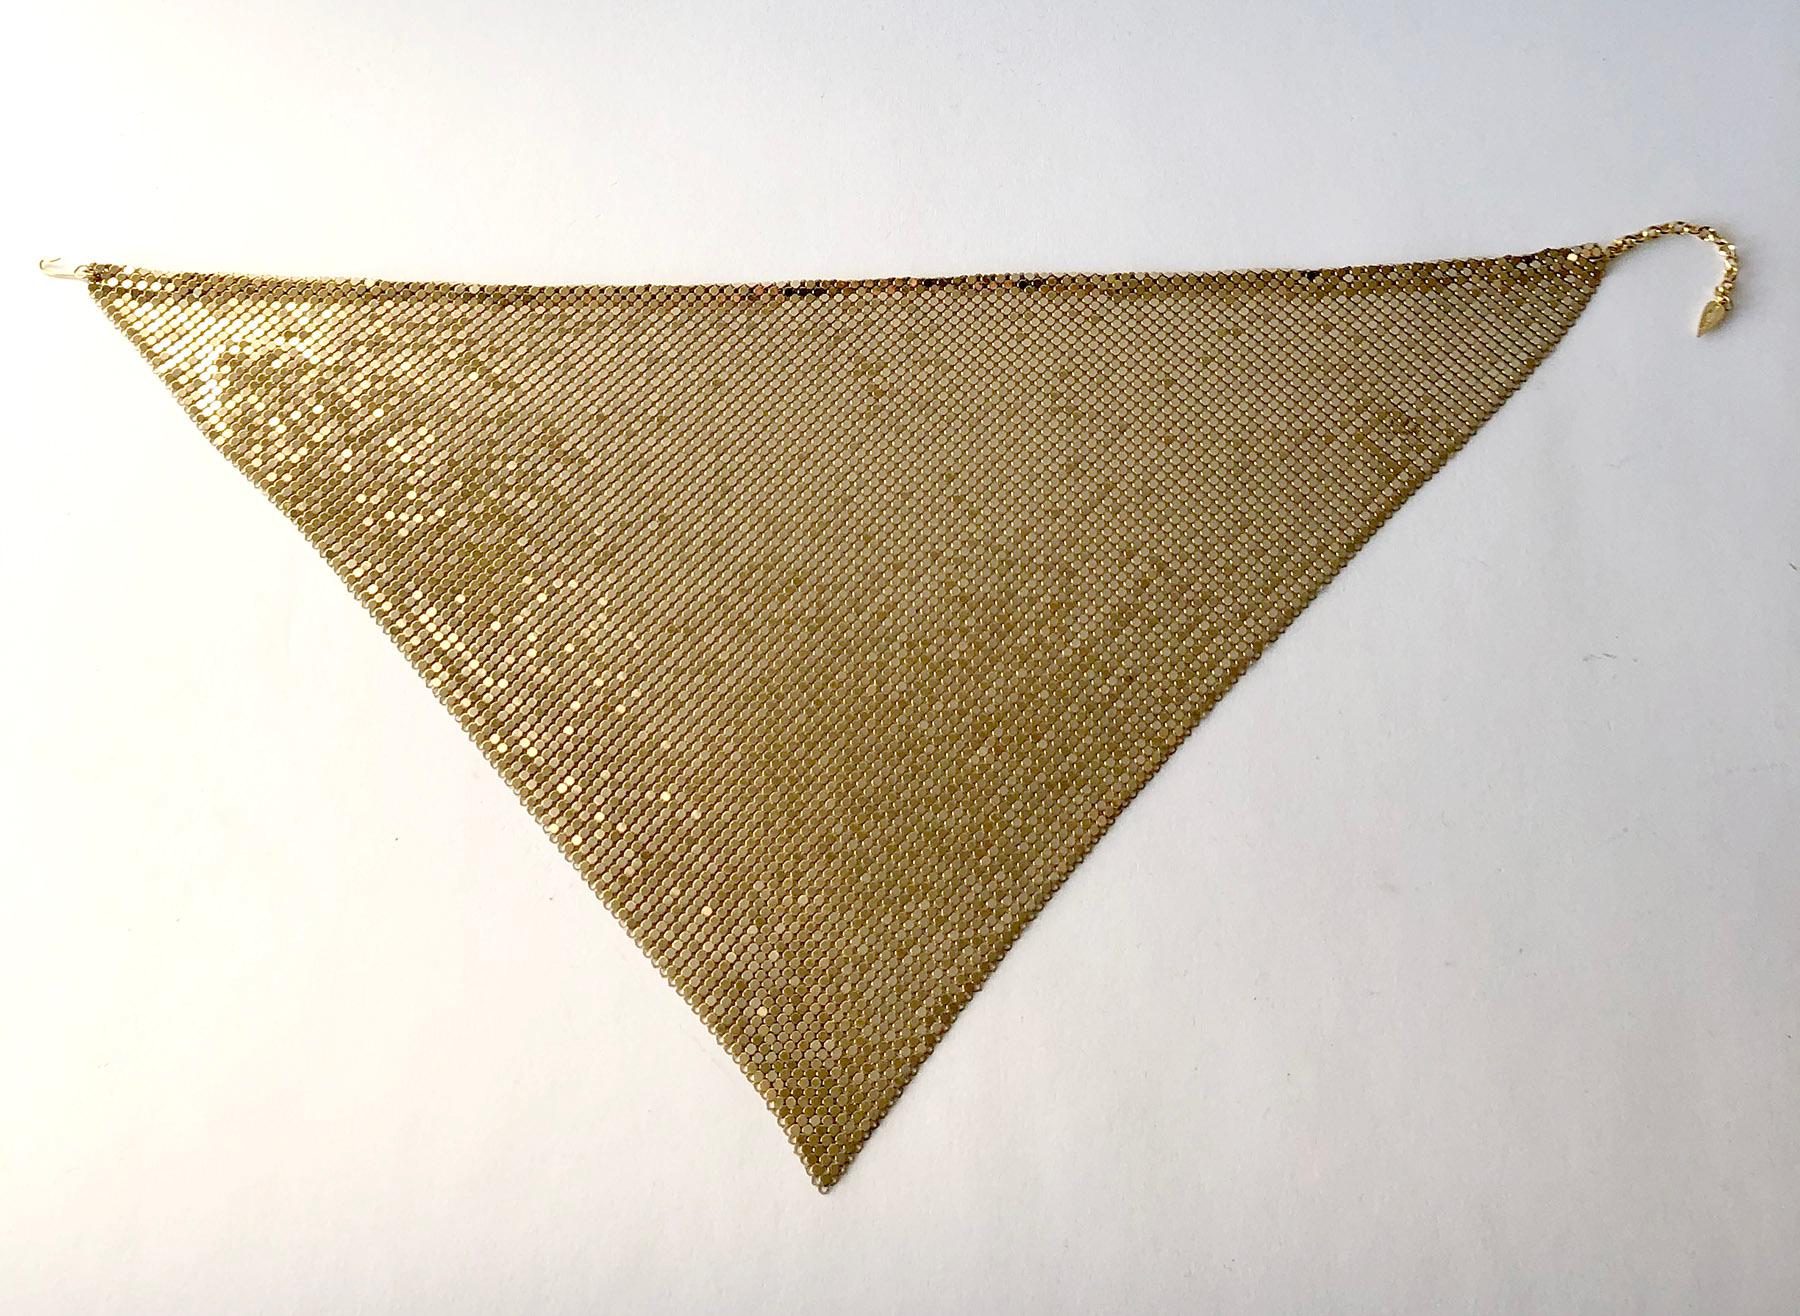 Metal gold mesh necklace by Whiting & Davis circa 1970's.  Necklace measures 20